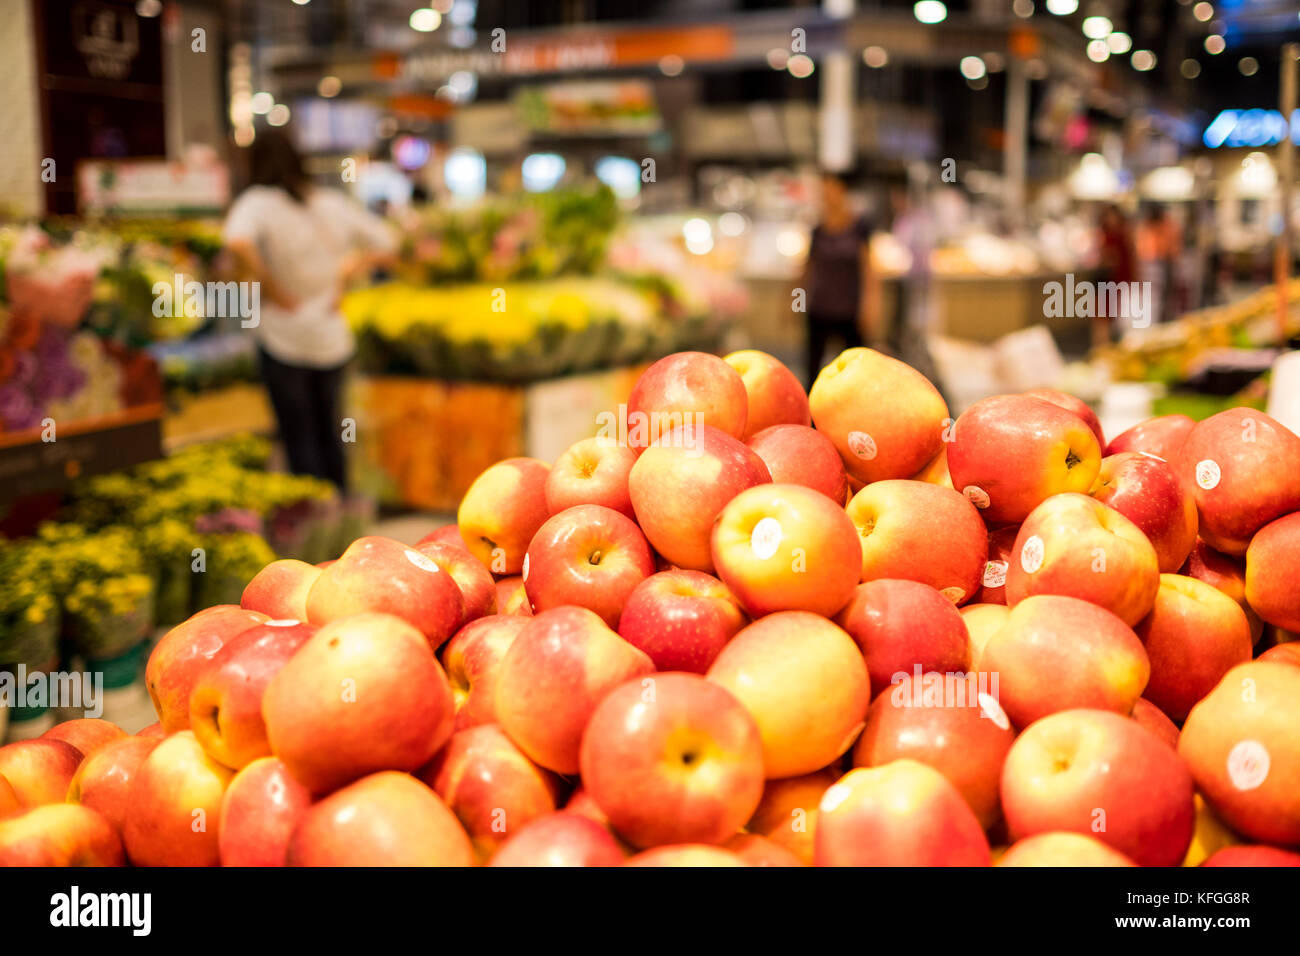 Page 2 Aeon Mall High Resolution Stock Photography And Images Alamy